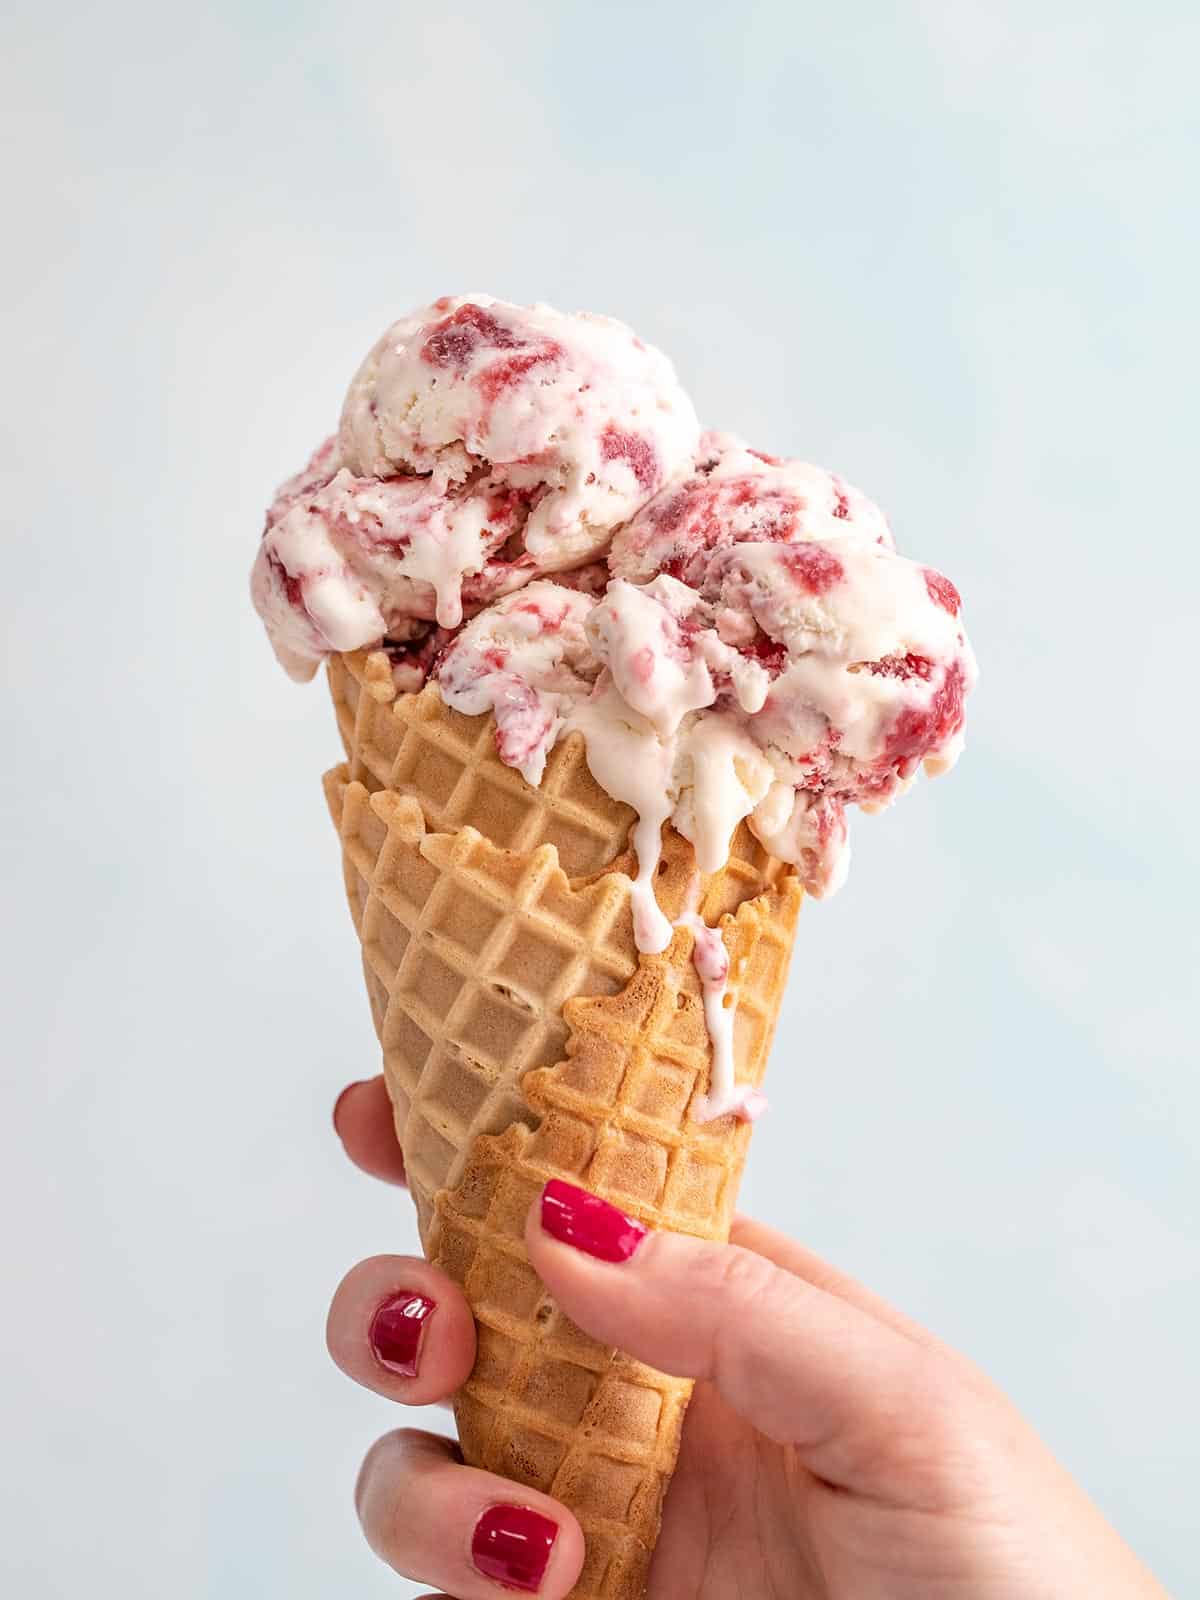 Side view of a hand holding a no-churn strawberry ice cream cone.